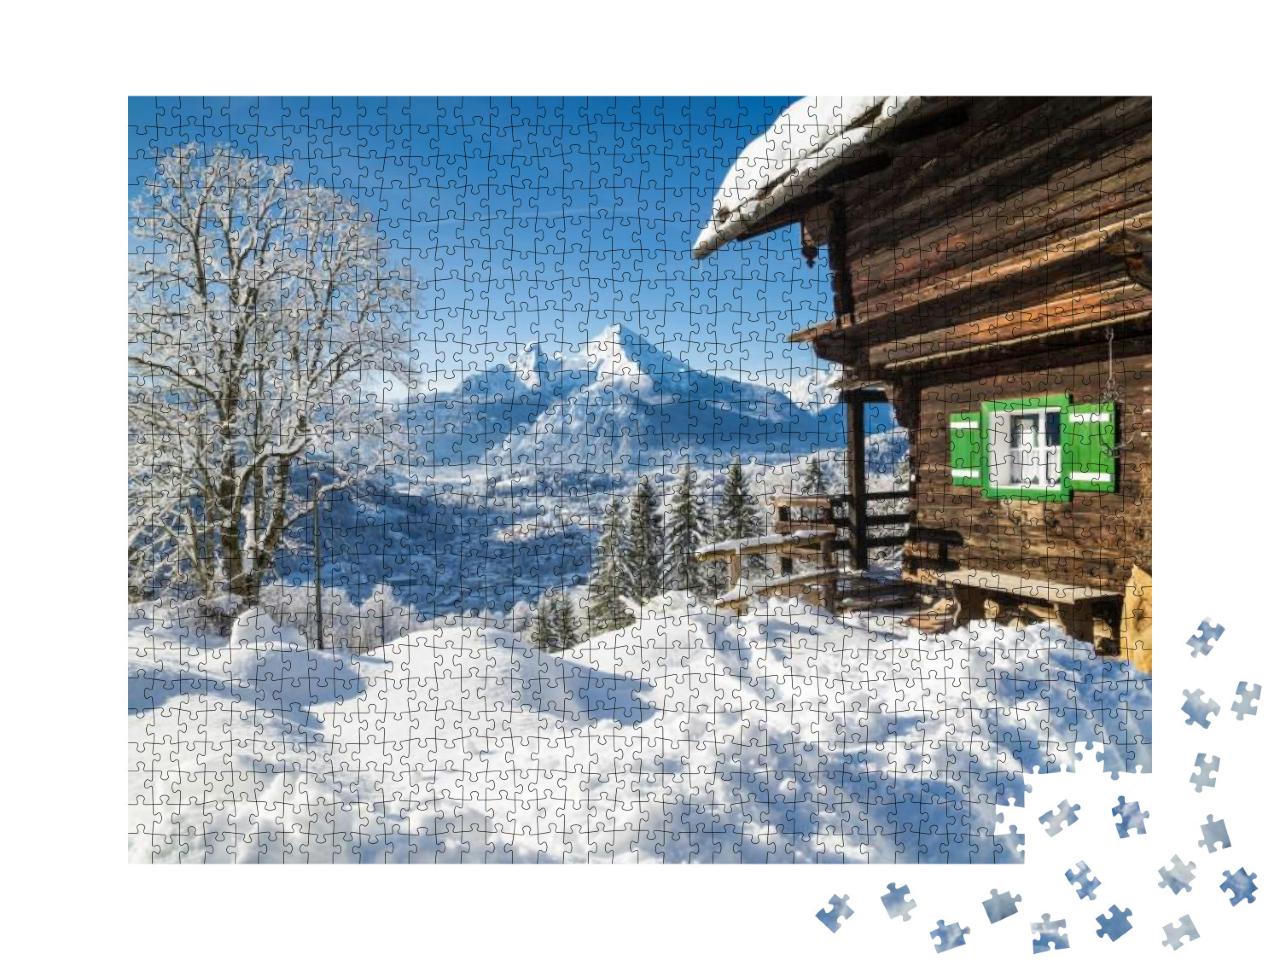 Panoramic View of Scenic White Winter Wonderland Mountain... Jigsaw Puzzle with 1000 pieces